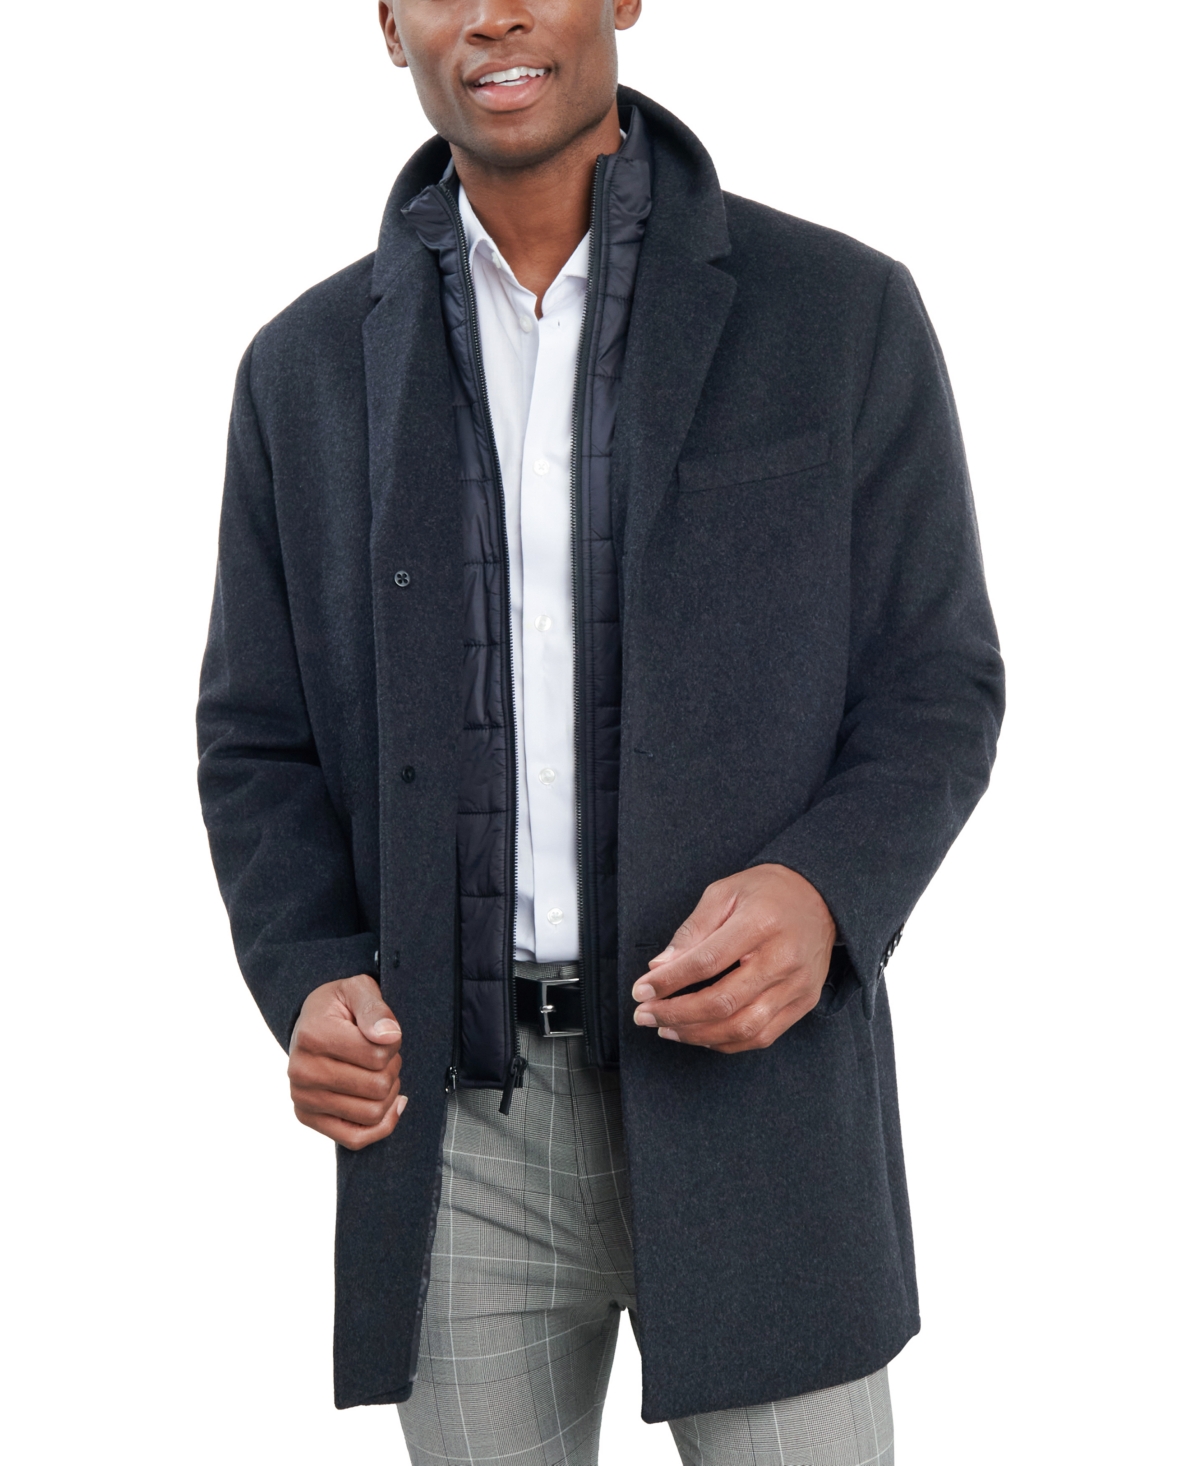 Men's Wool-Blend Overcoat & Attached Vest - New Charcoal